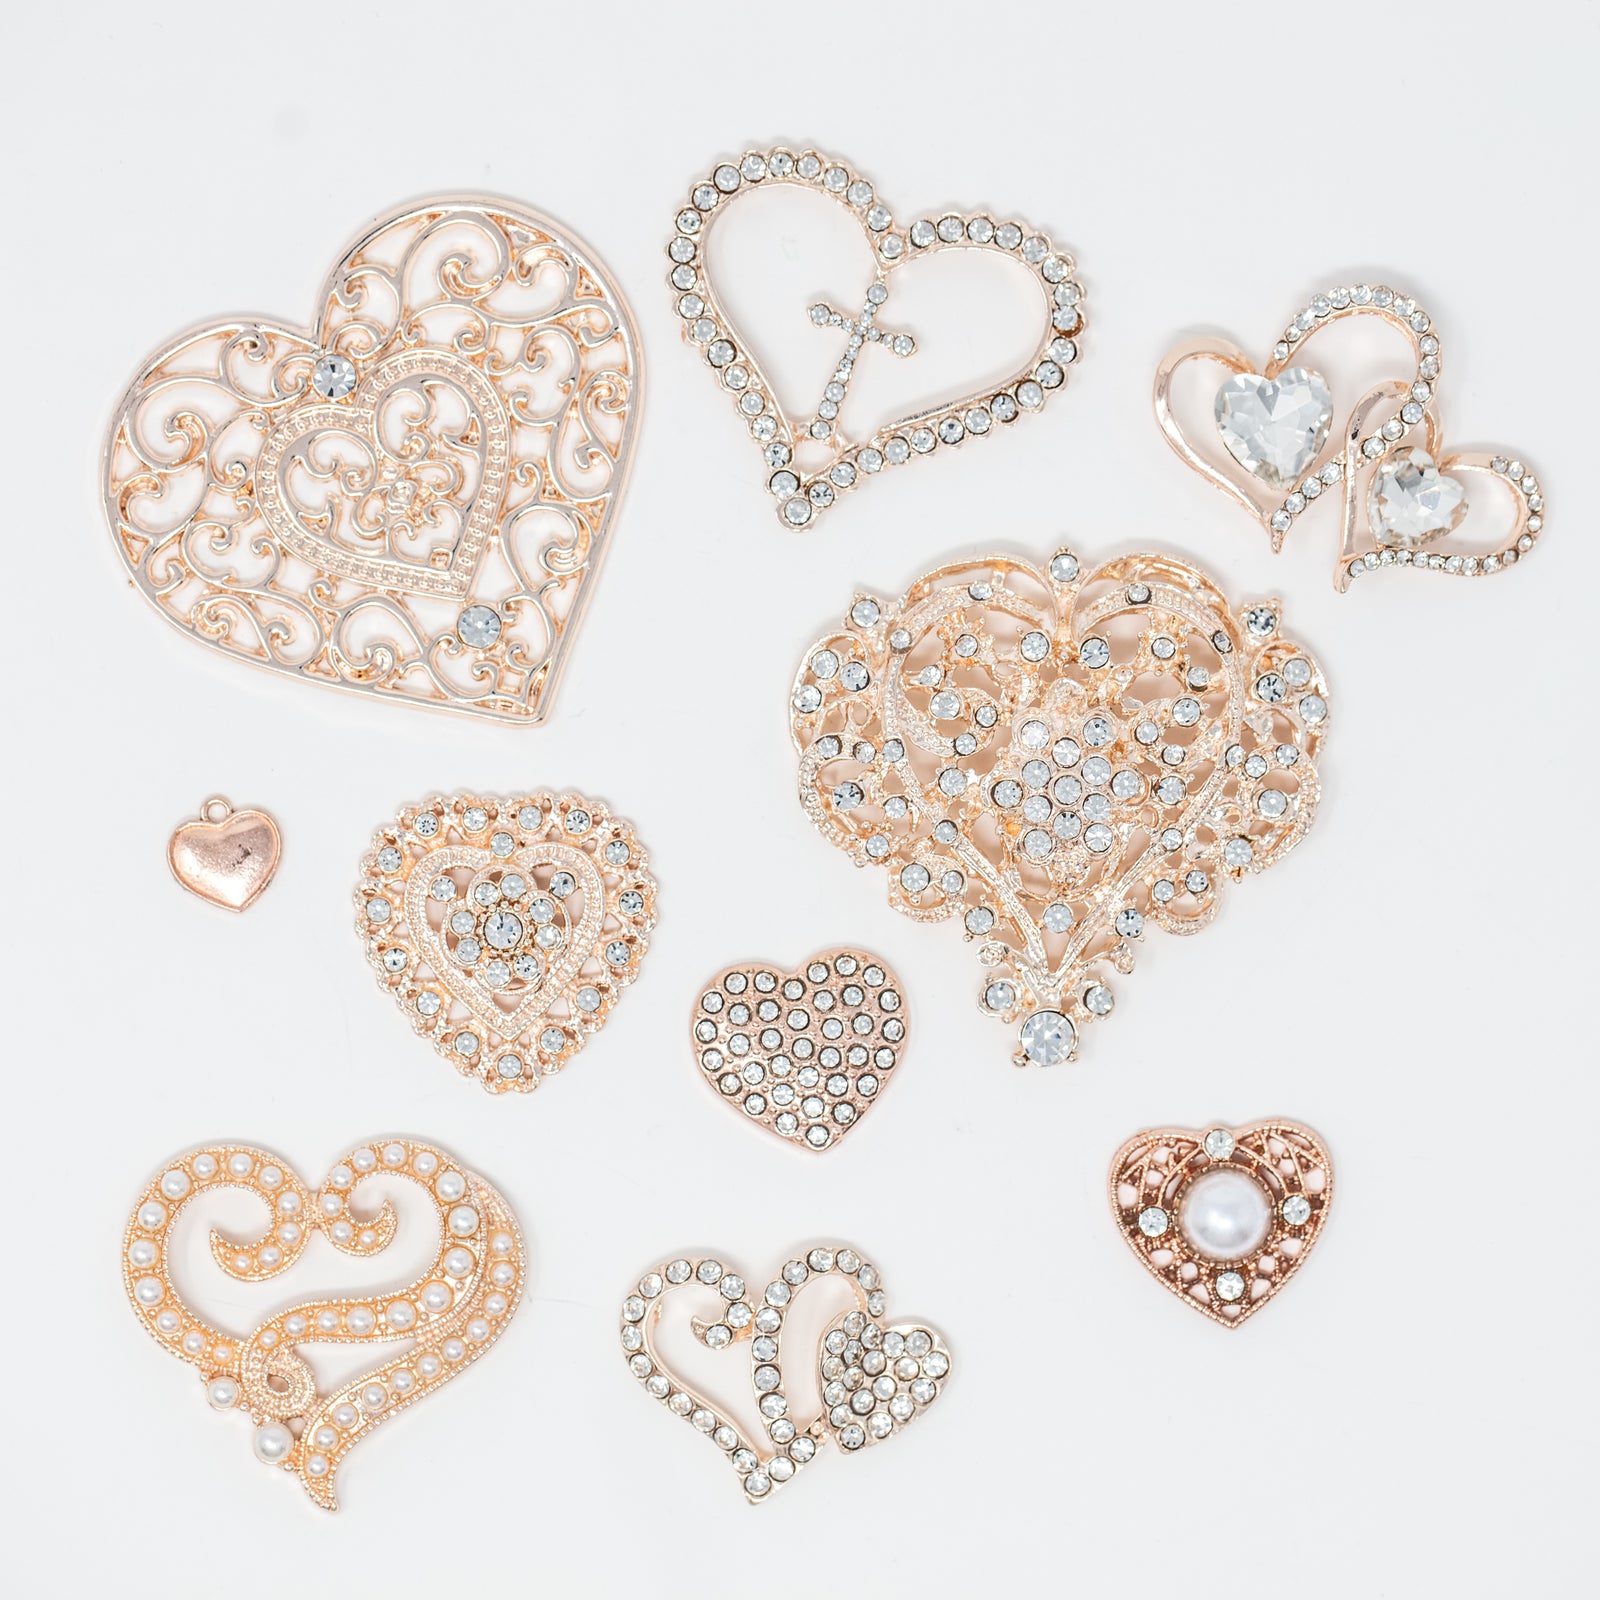 Totally Dazzled Crystal Brooches Wholesale Prices